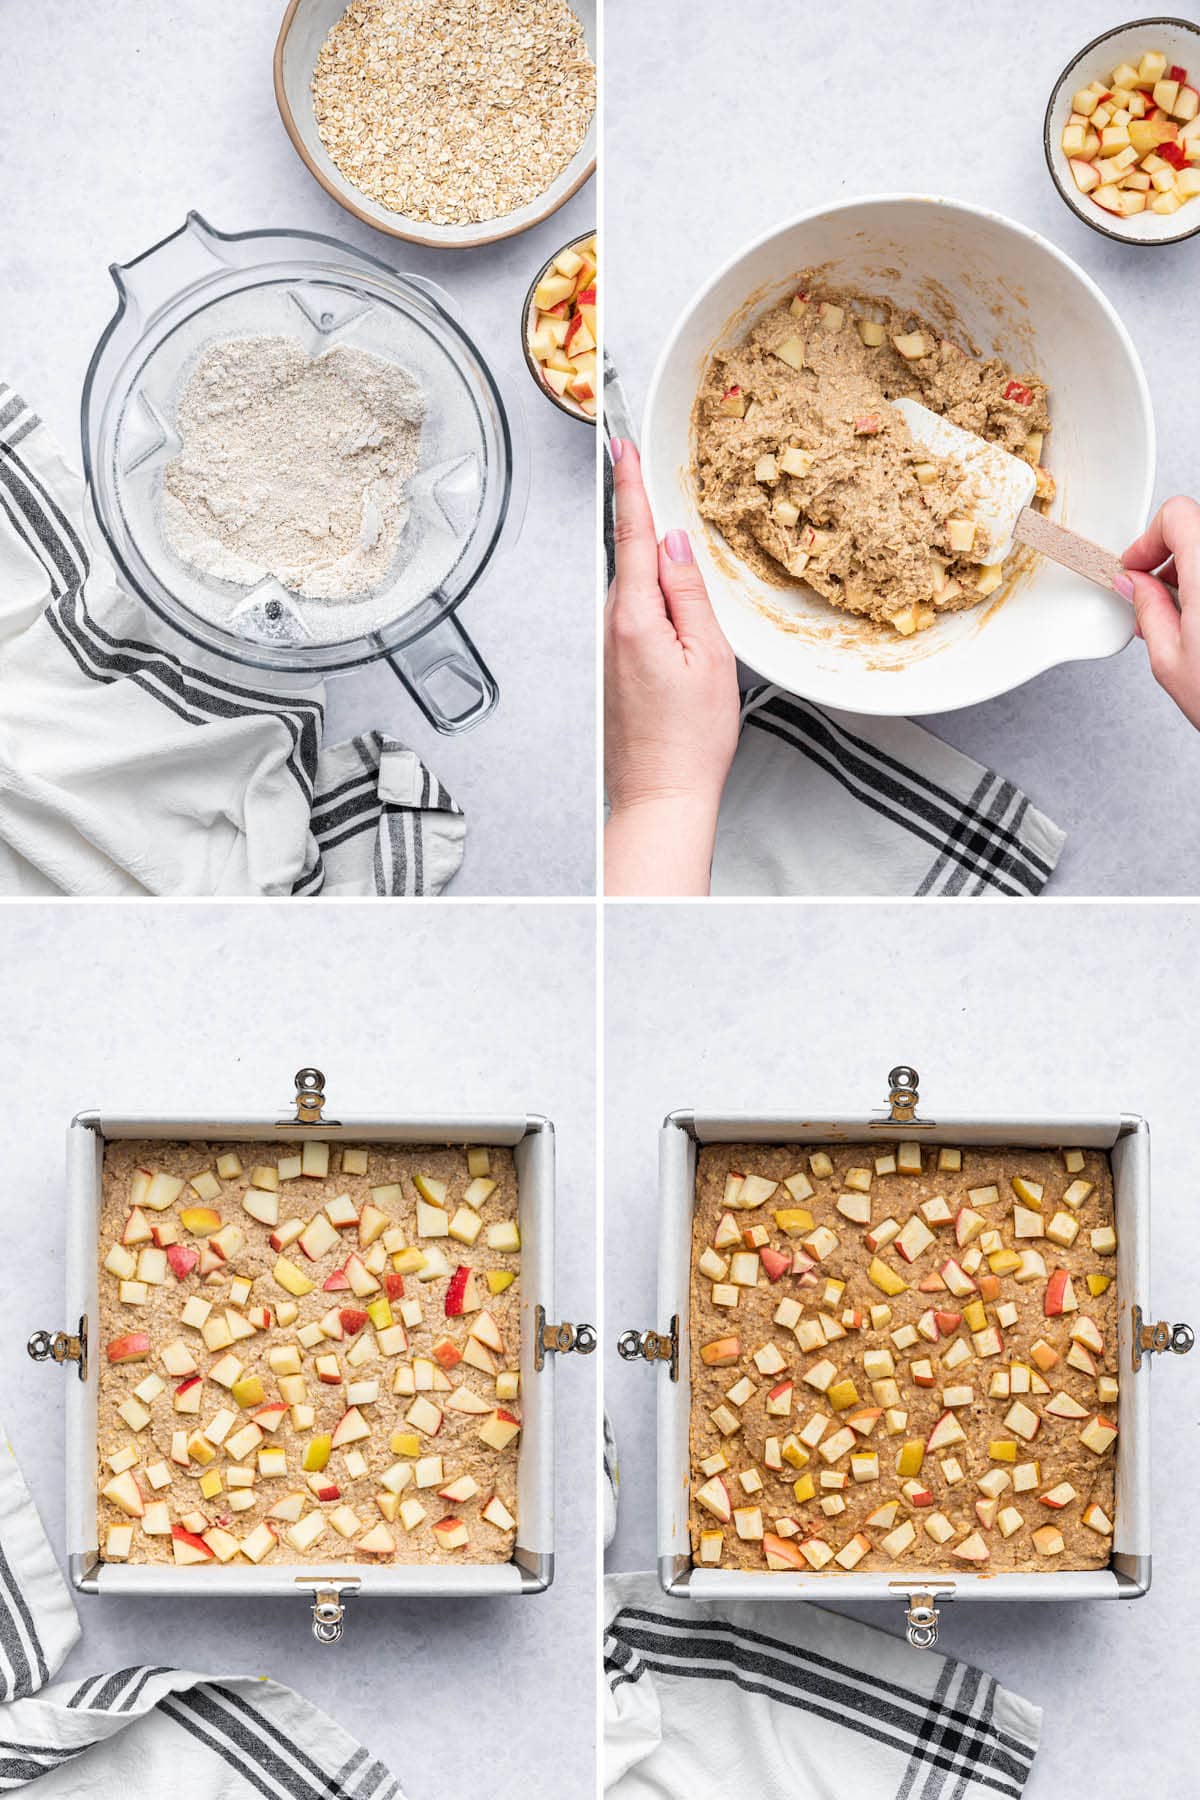 Collage of four photos showing how to make Apple Oatmeal Bars: mixing the batter and then baking in a pan.